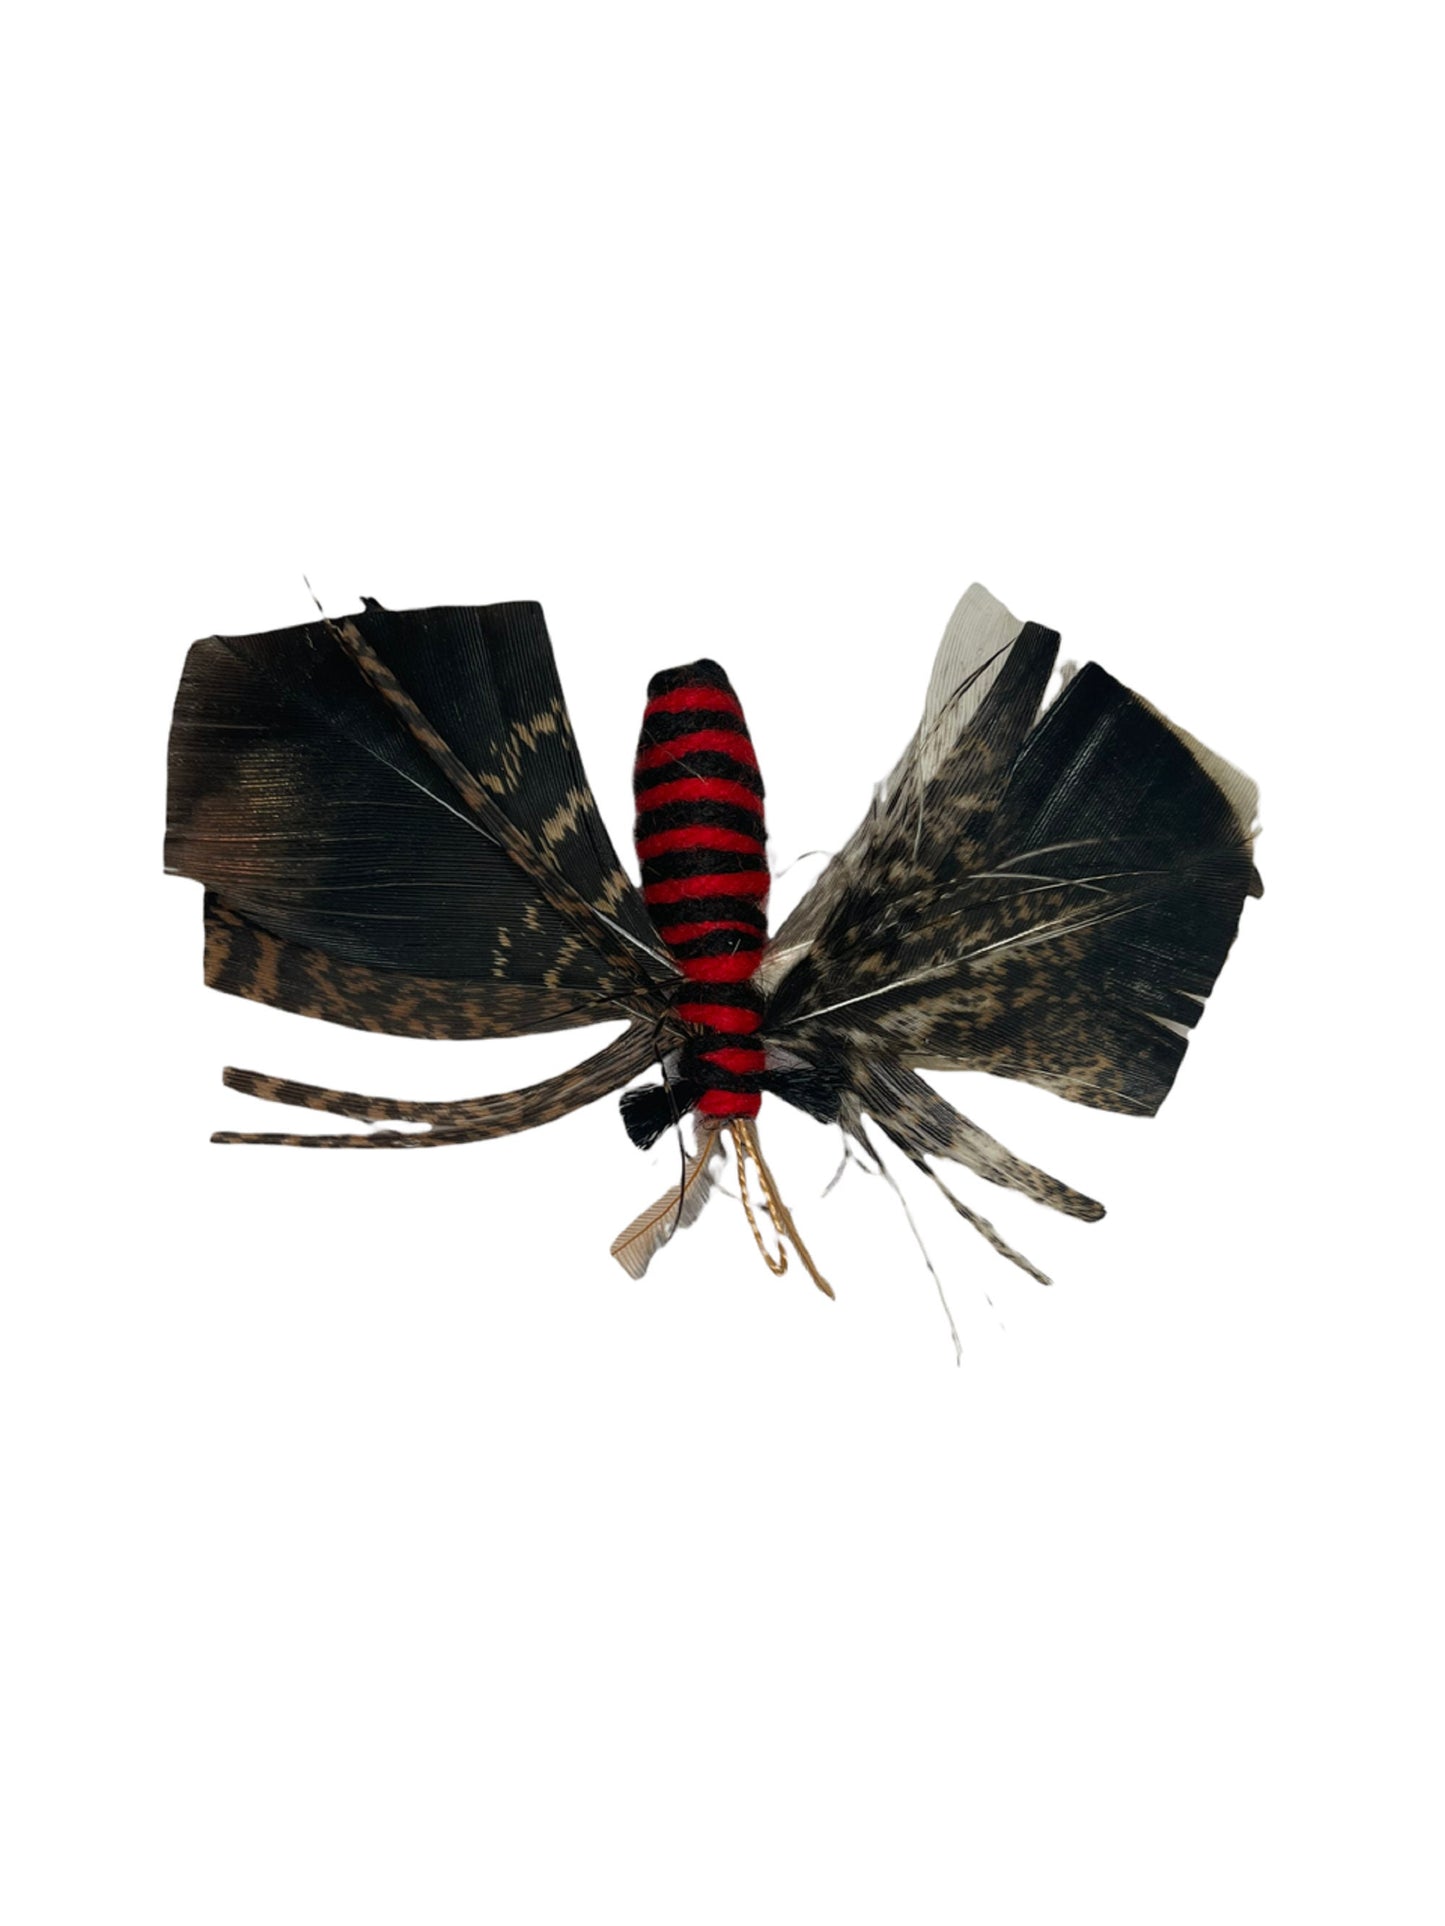 Butterfly 3 Pack